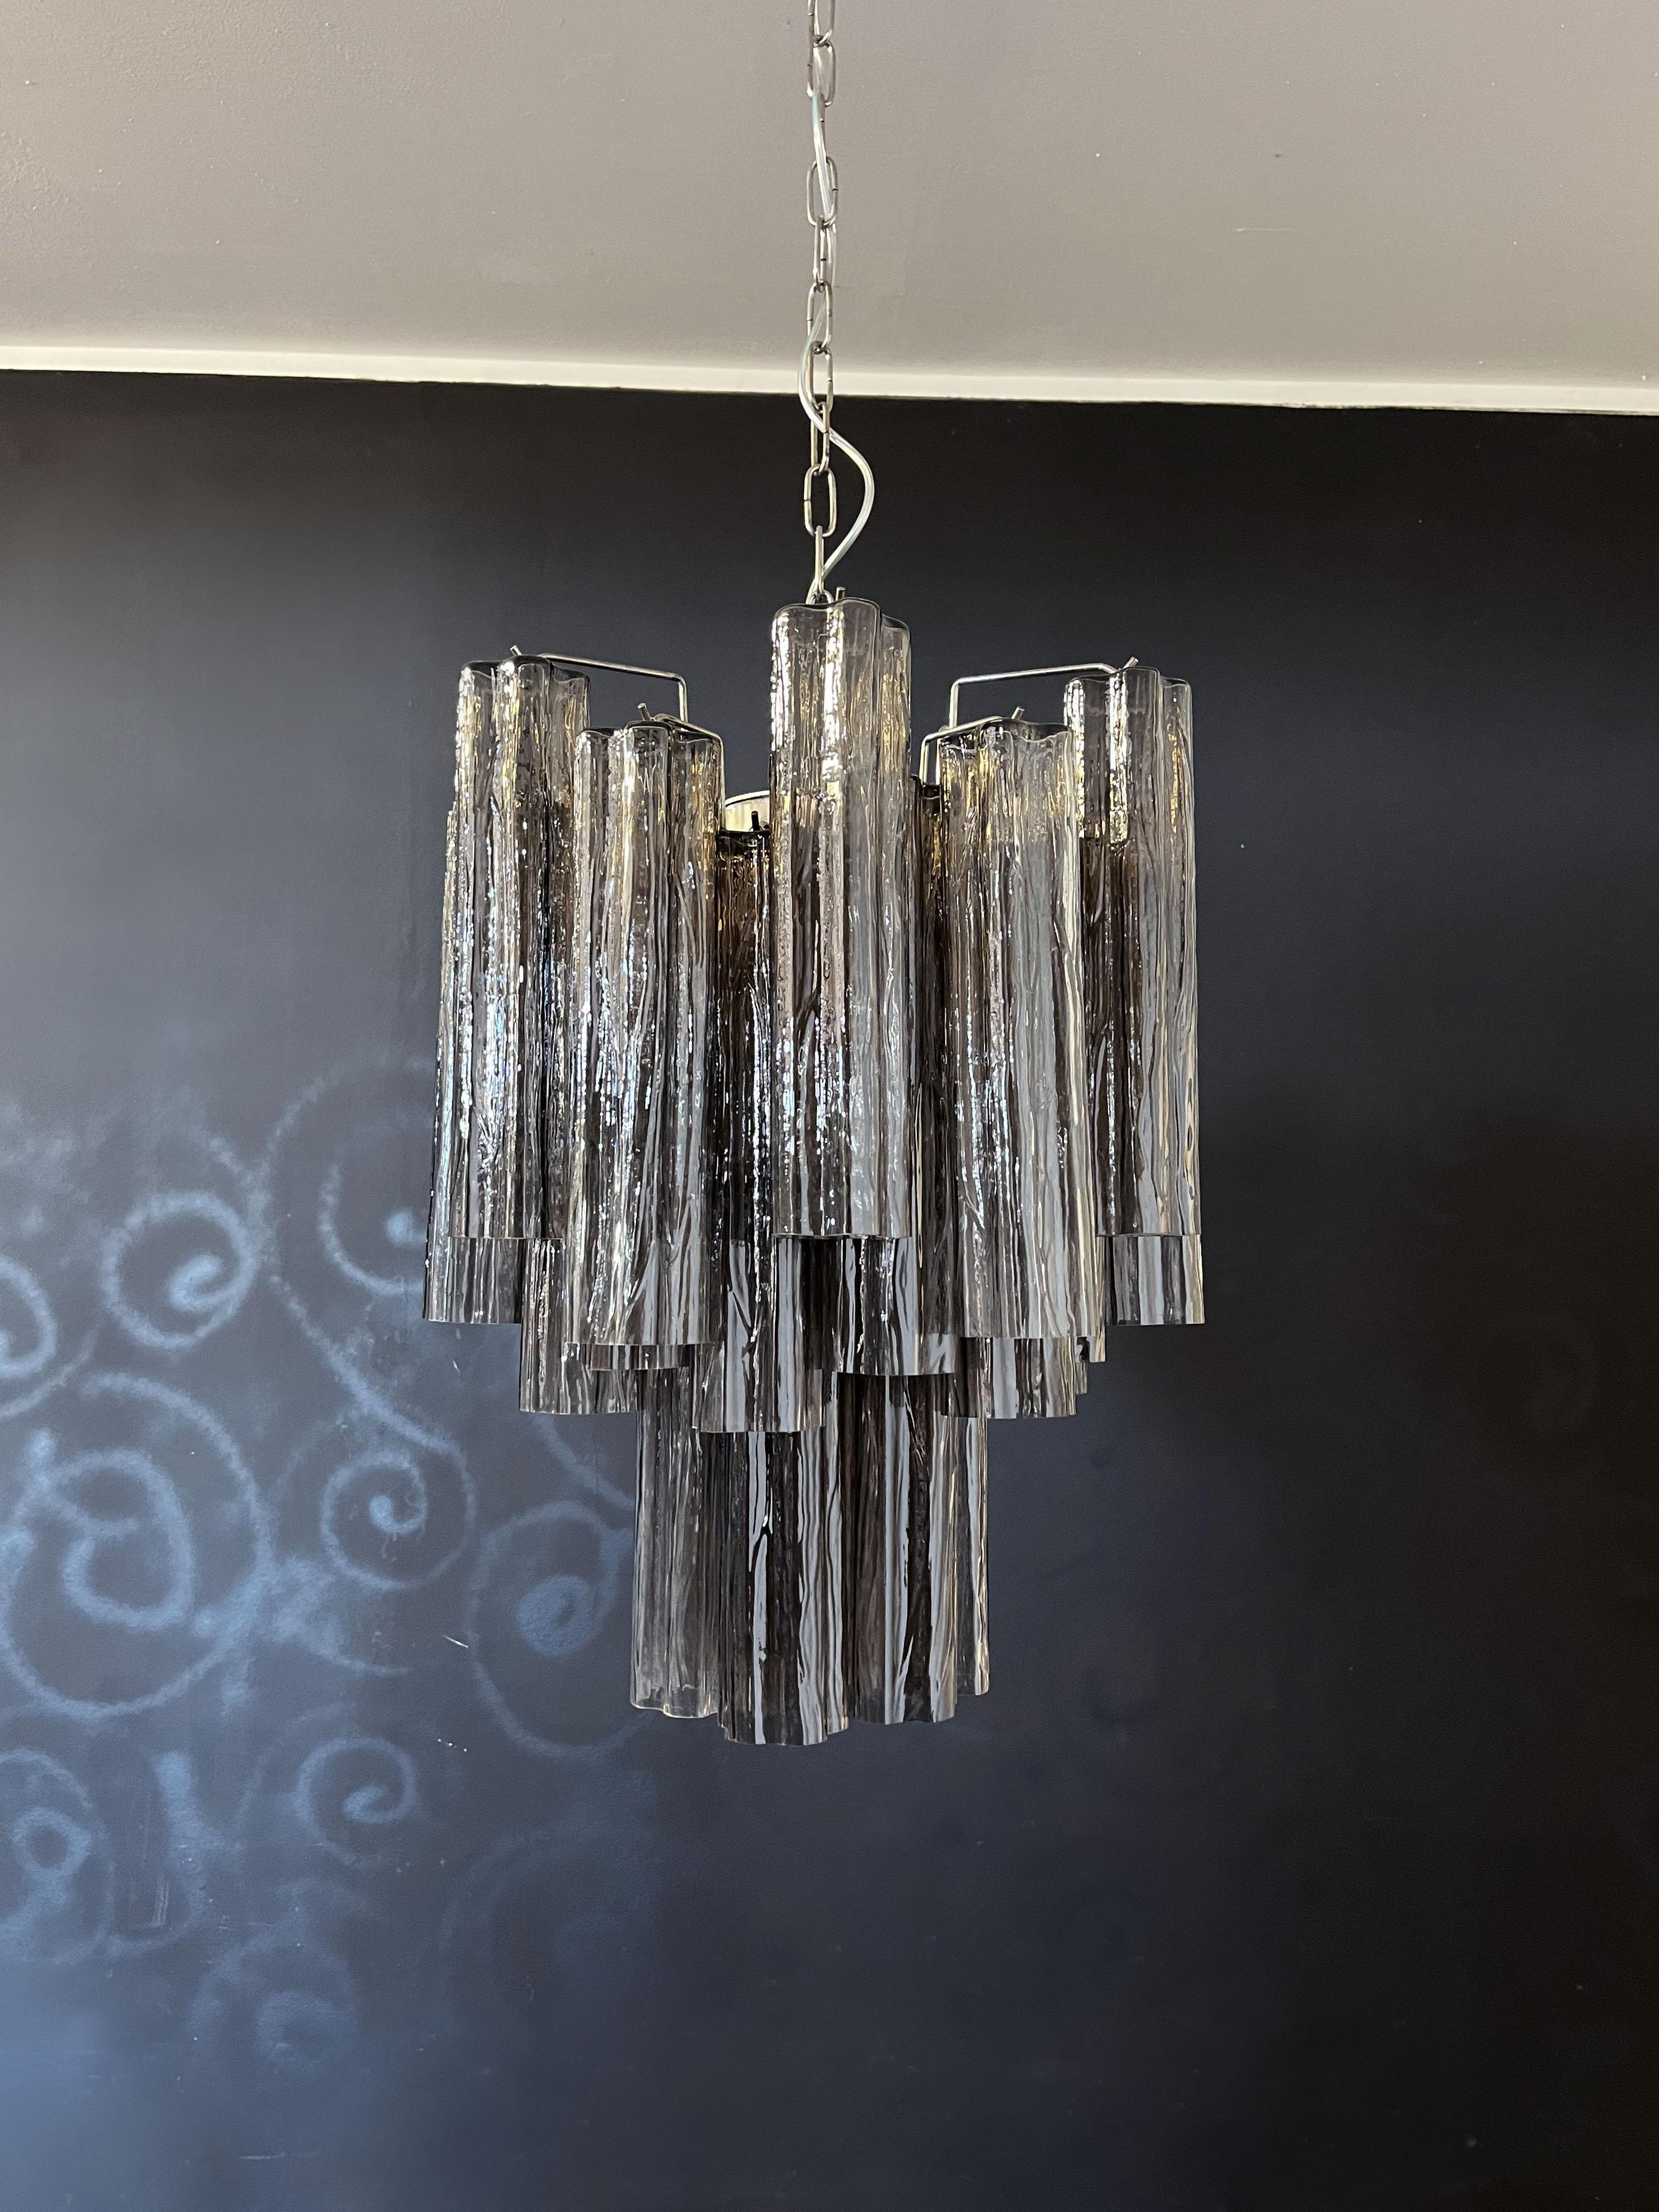 Italian vintage chandelier in Murano glass and nickel-plated metal structure. The armor polished nickel supports 30 largesmoked glass tubes.
Period: late XX century
Dimensions: 47,25 inches (120 cm) height with chain; 24,80 inches (63 cm) height